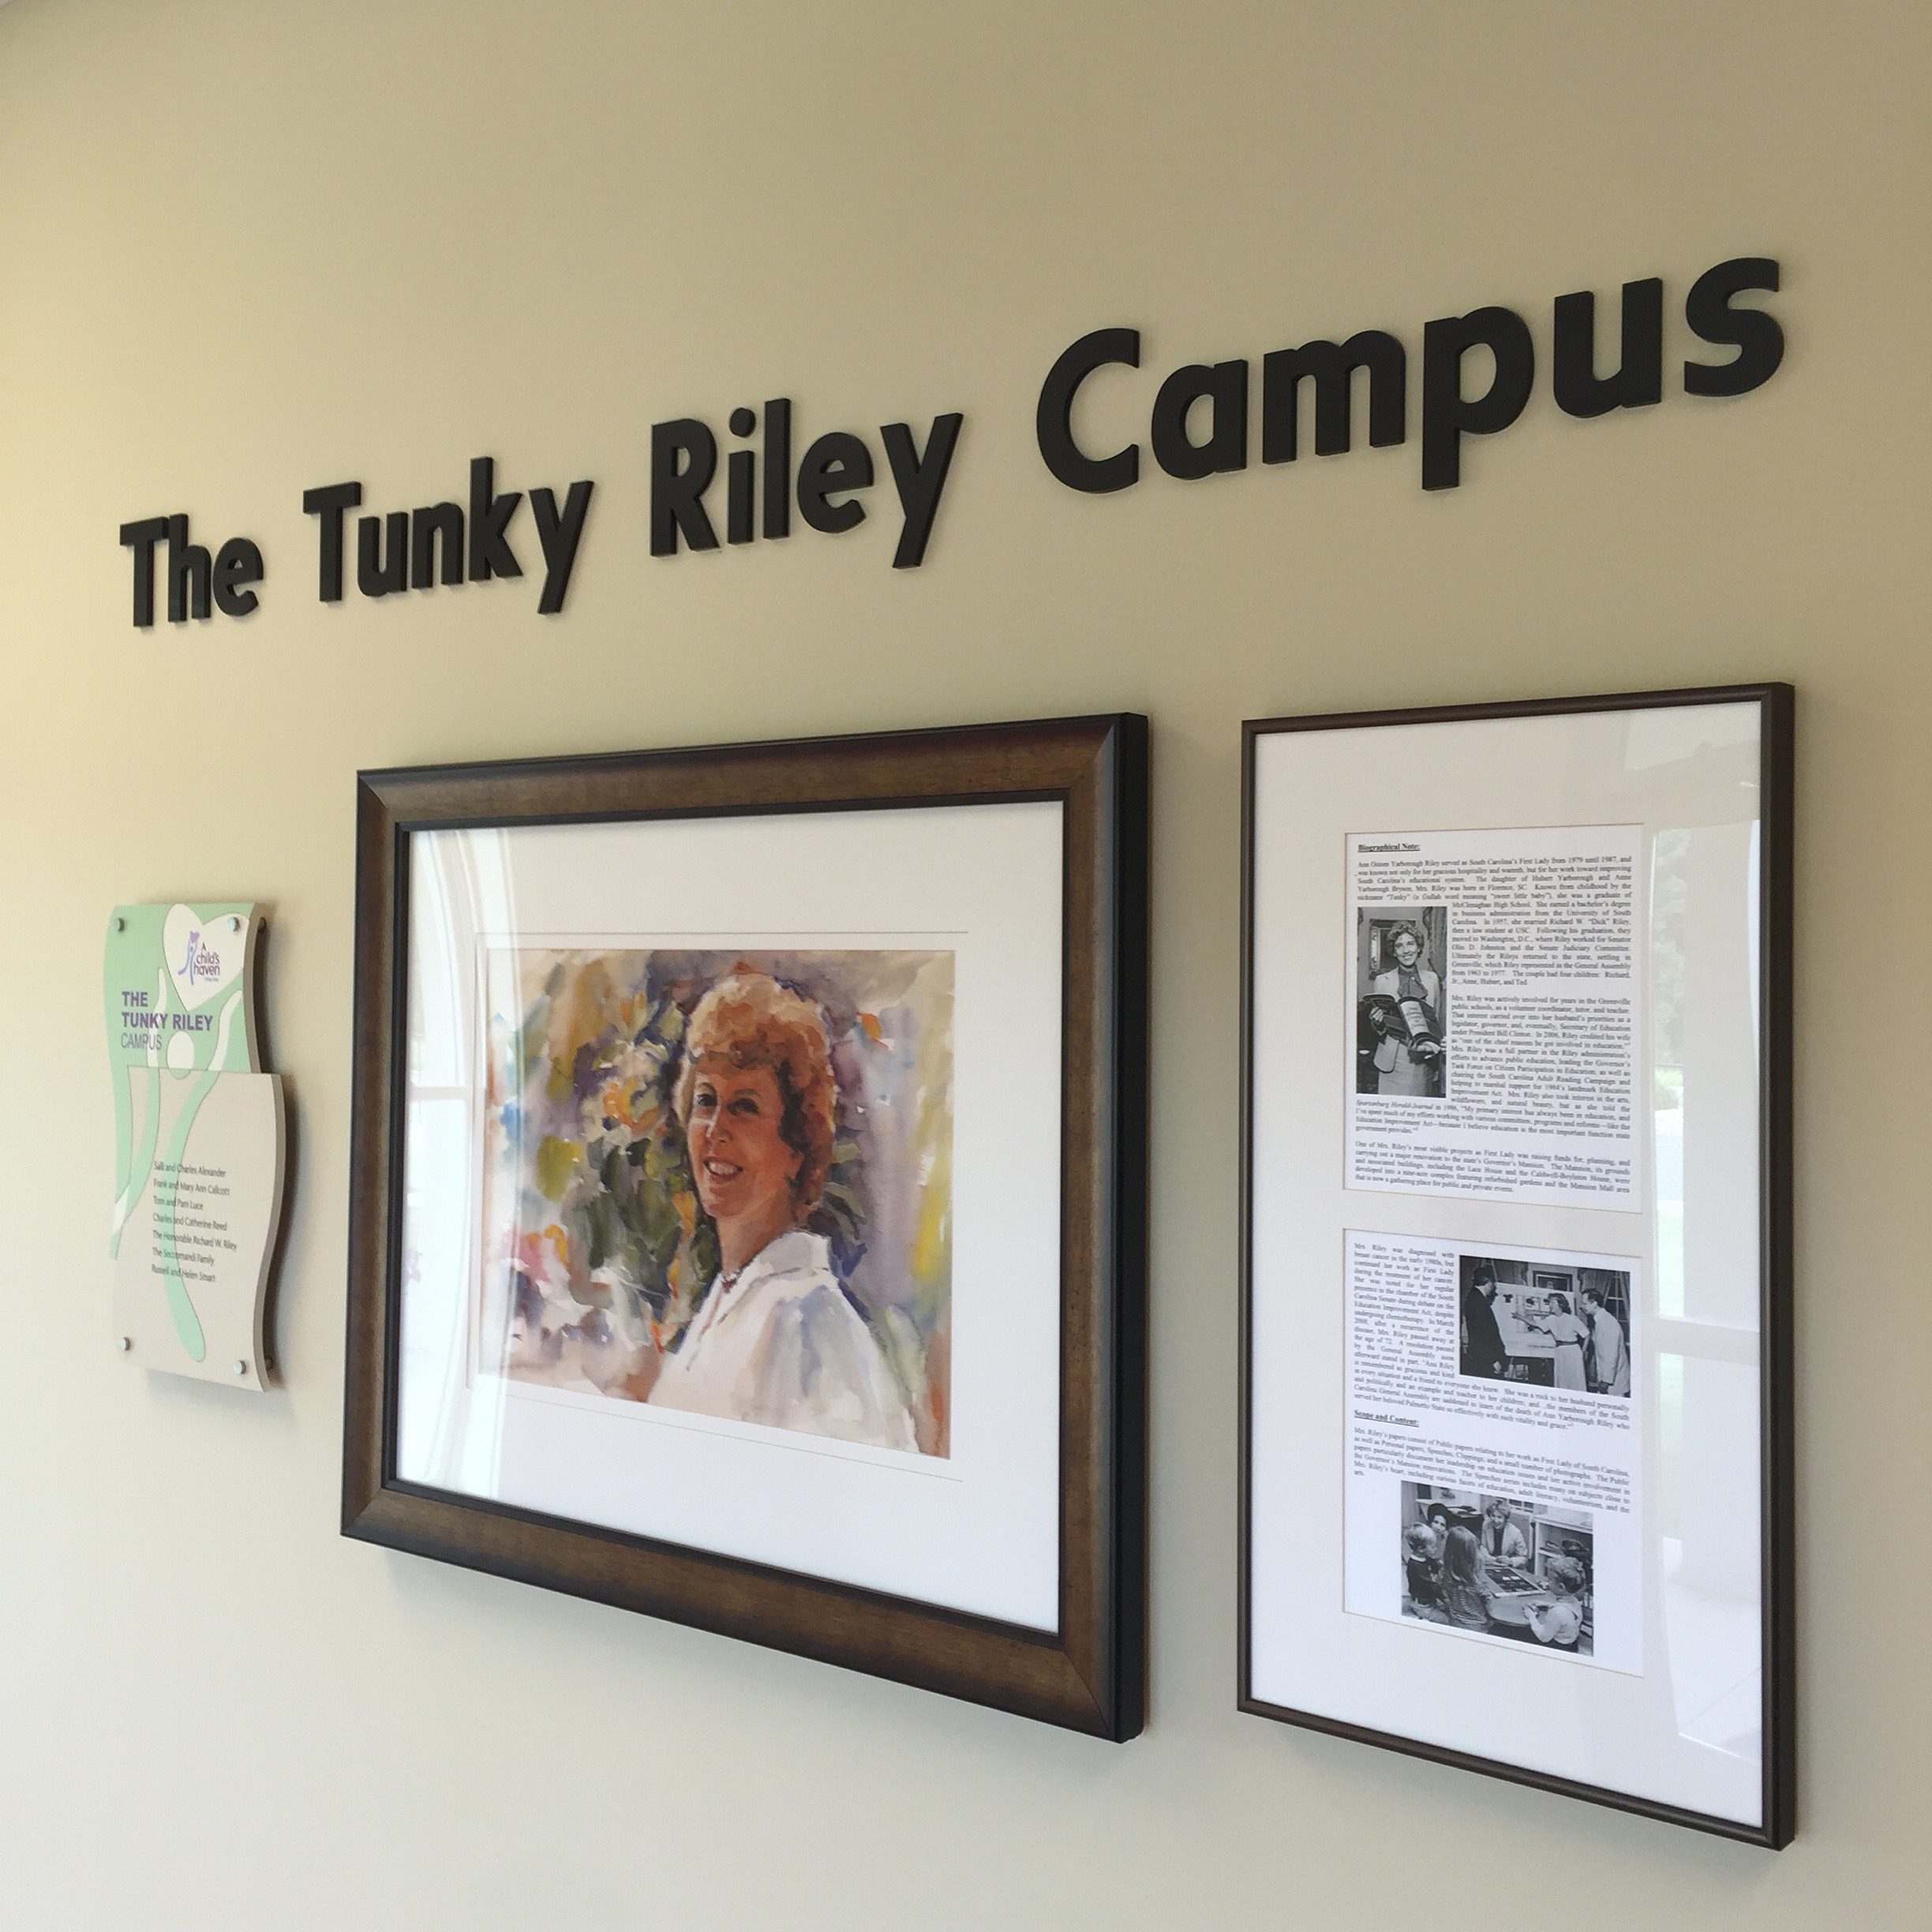 The A Child's Haven campus is named for Tunky Riley, late wife of Secretary Riley and huge early childhood education advocate